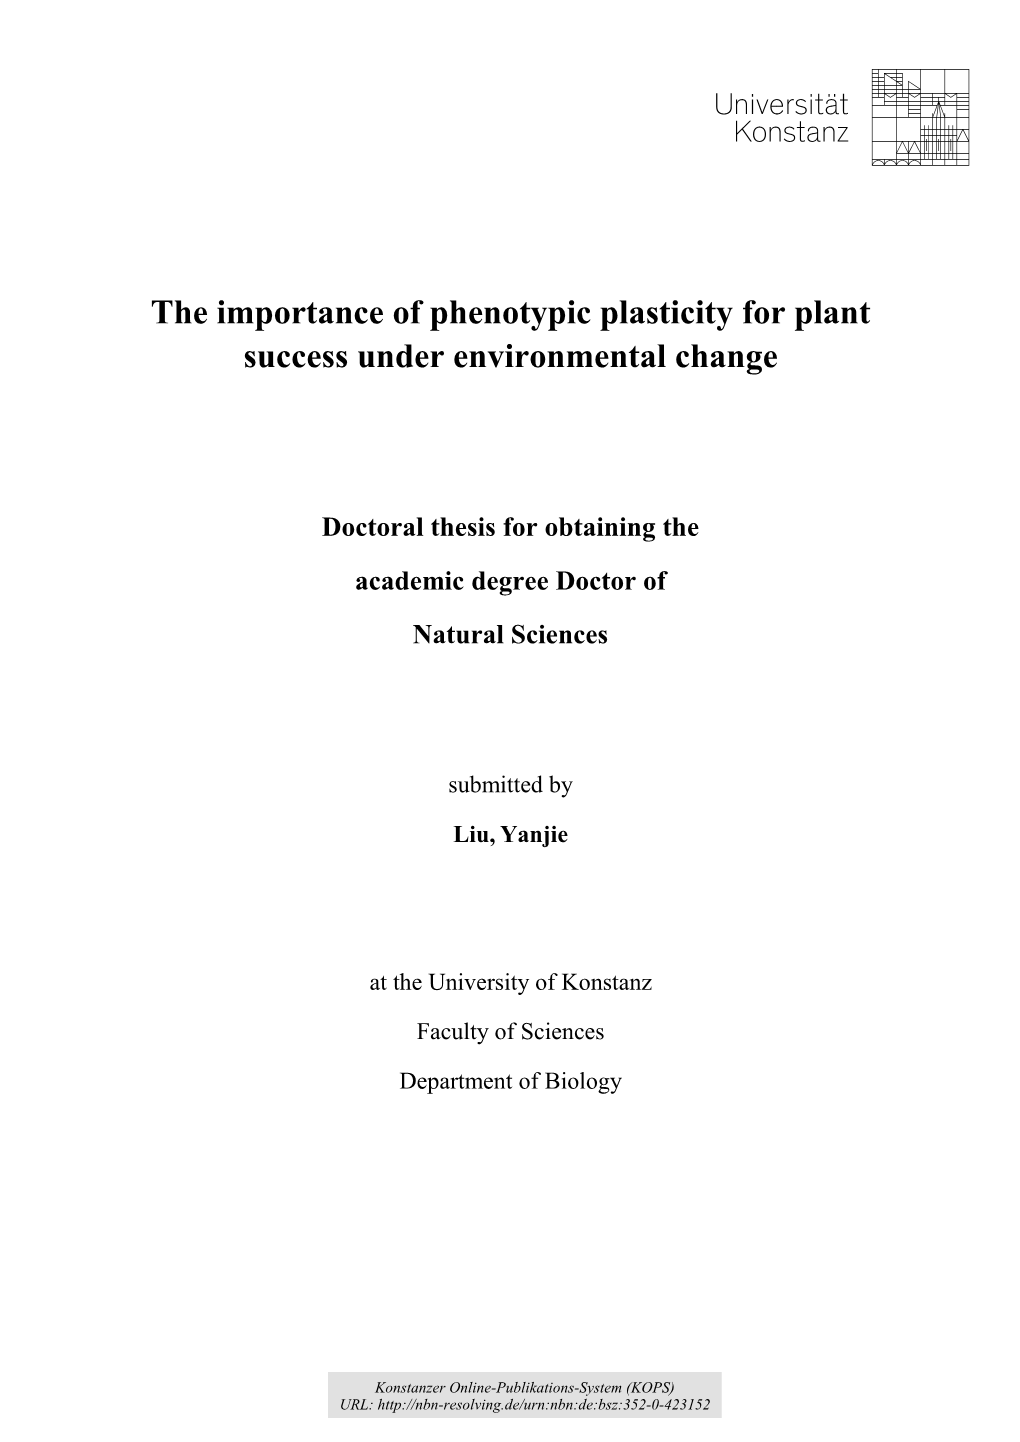 The Importance of Phenotypic Plasticity for Plant Success Under Environmental Change